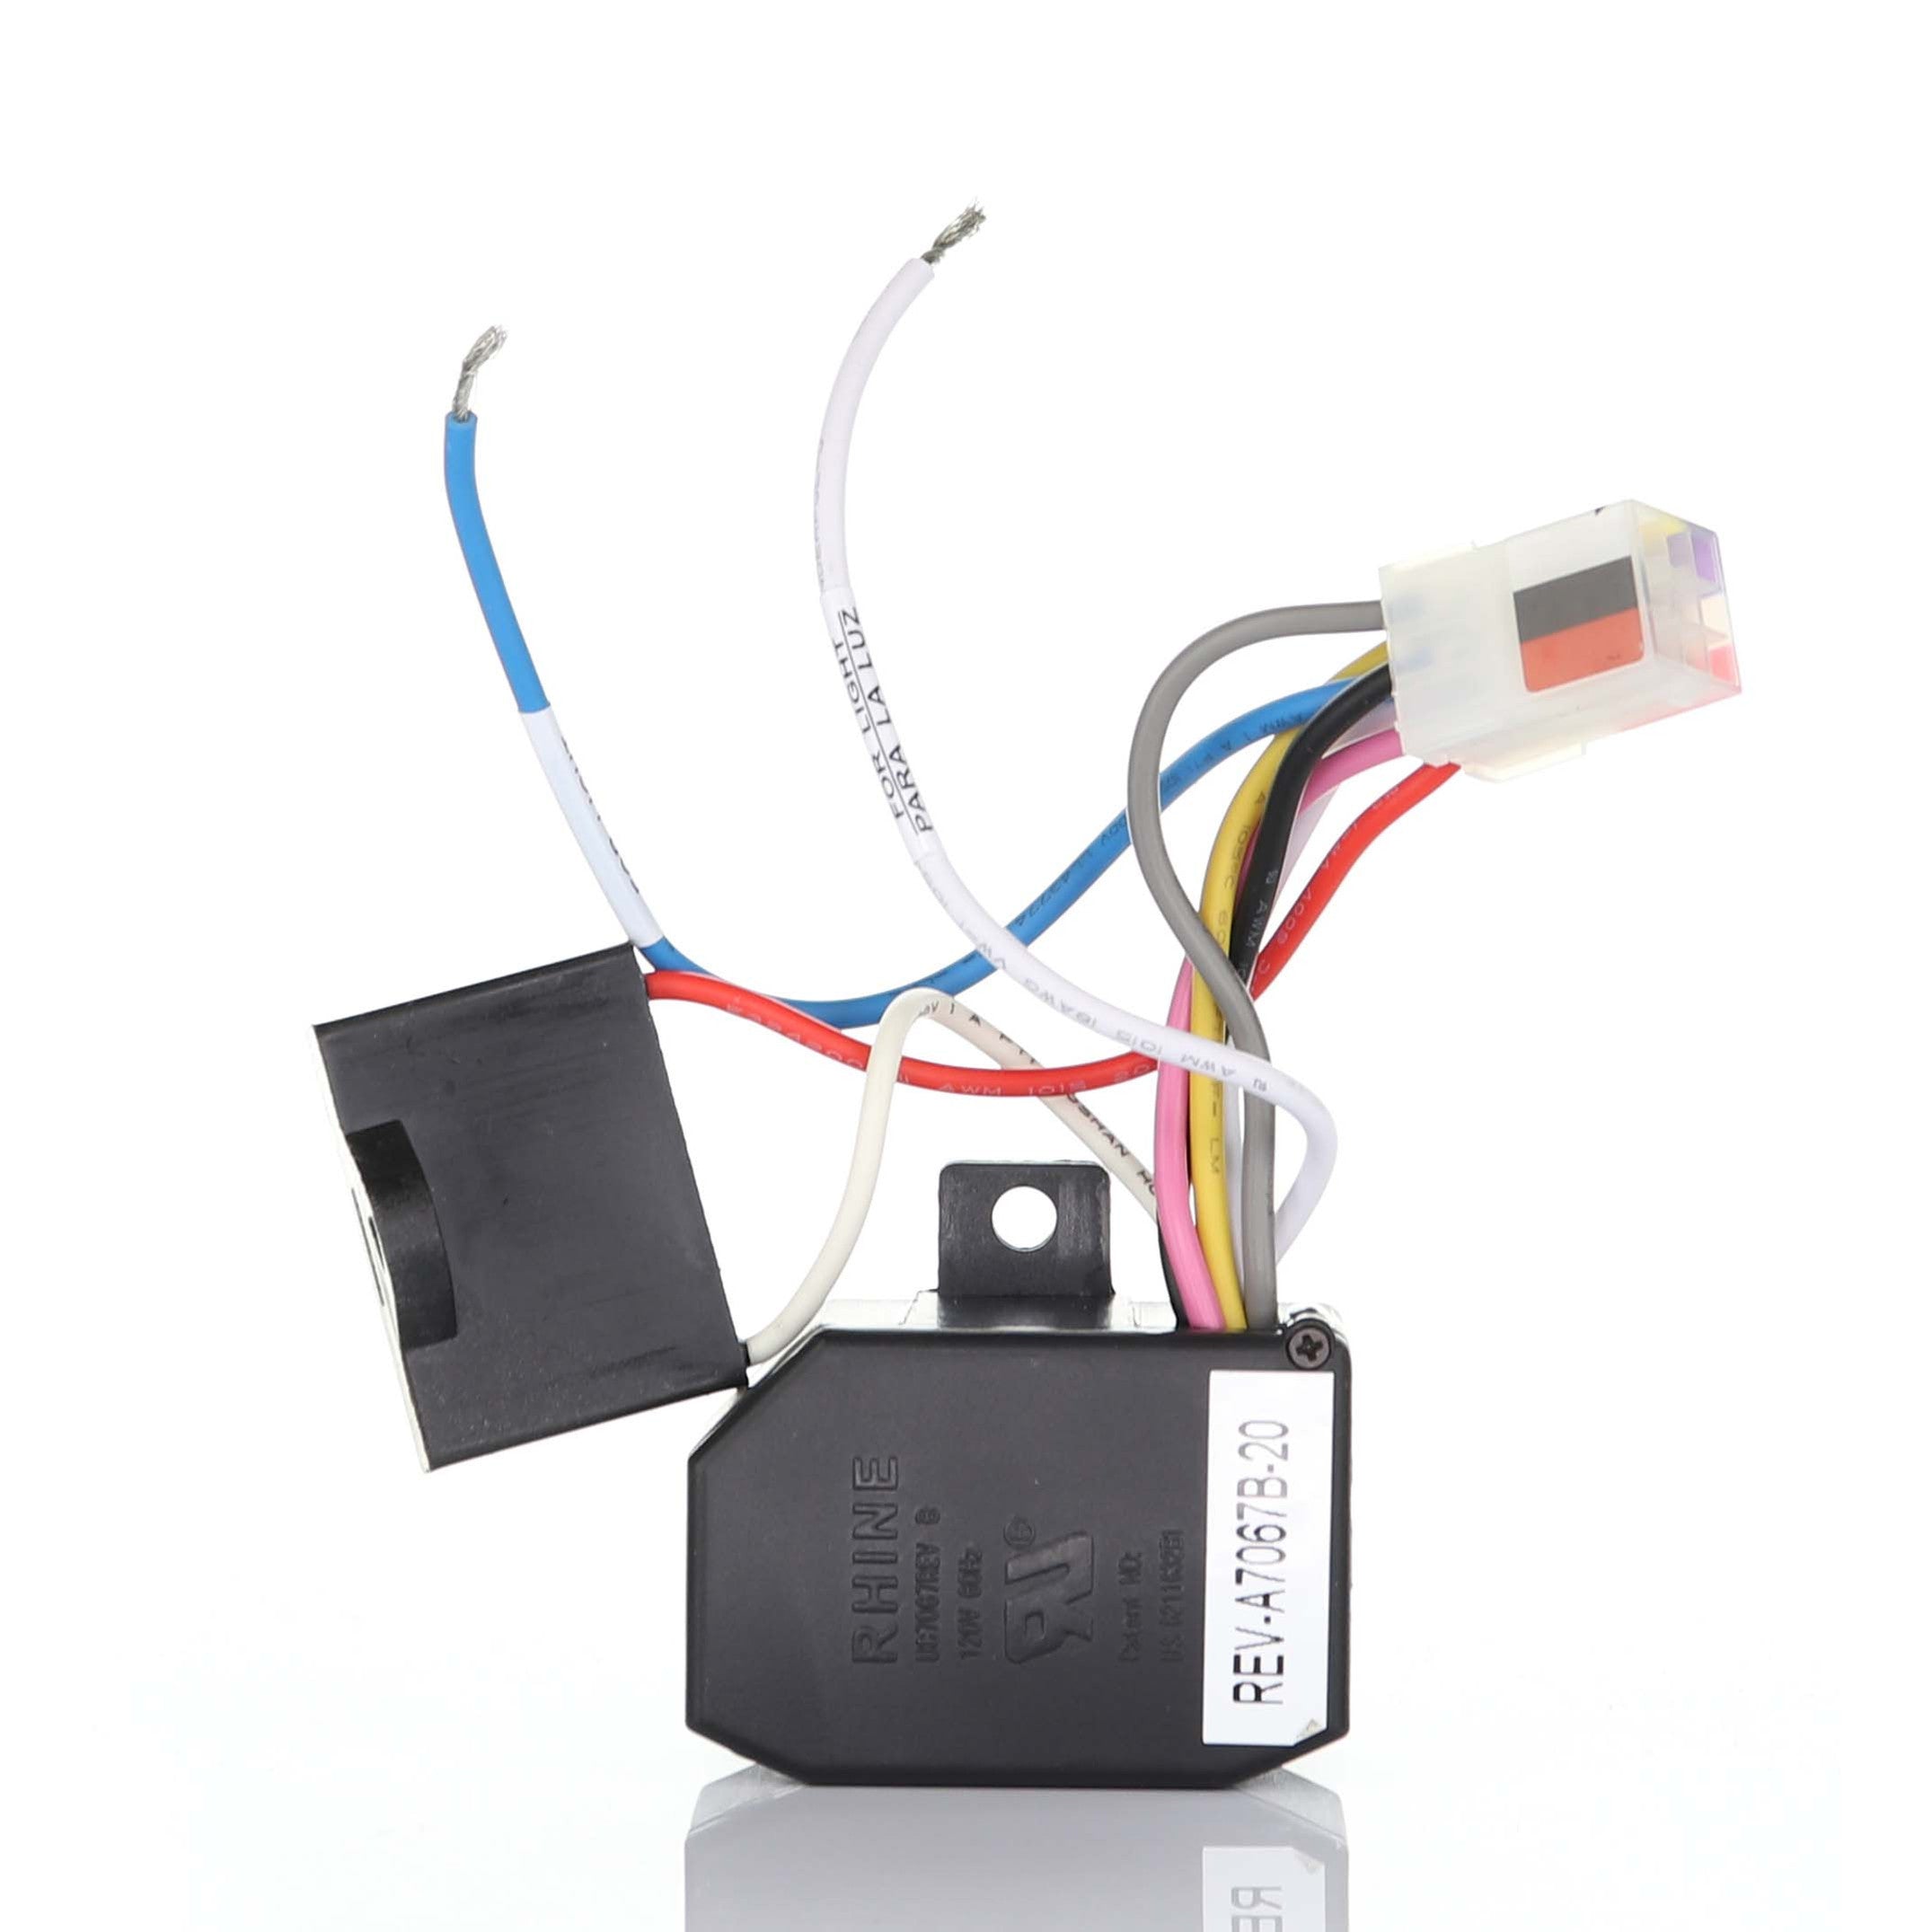 UC7067REVB Replacement Reverse (Reversing) Module for Ceiling Fans